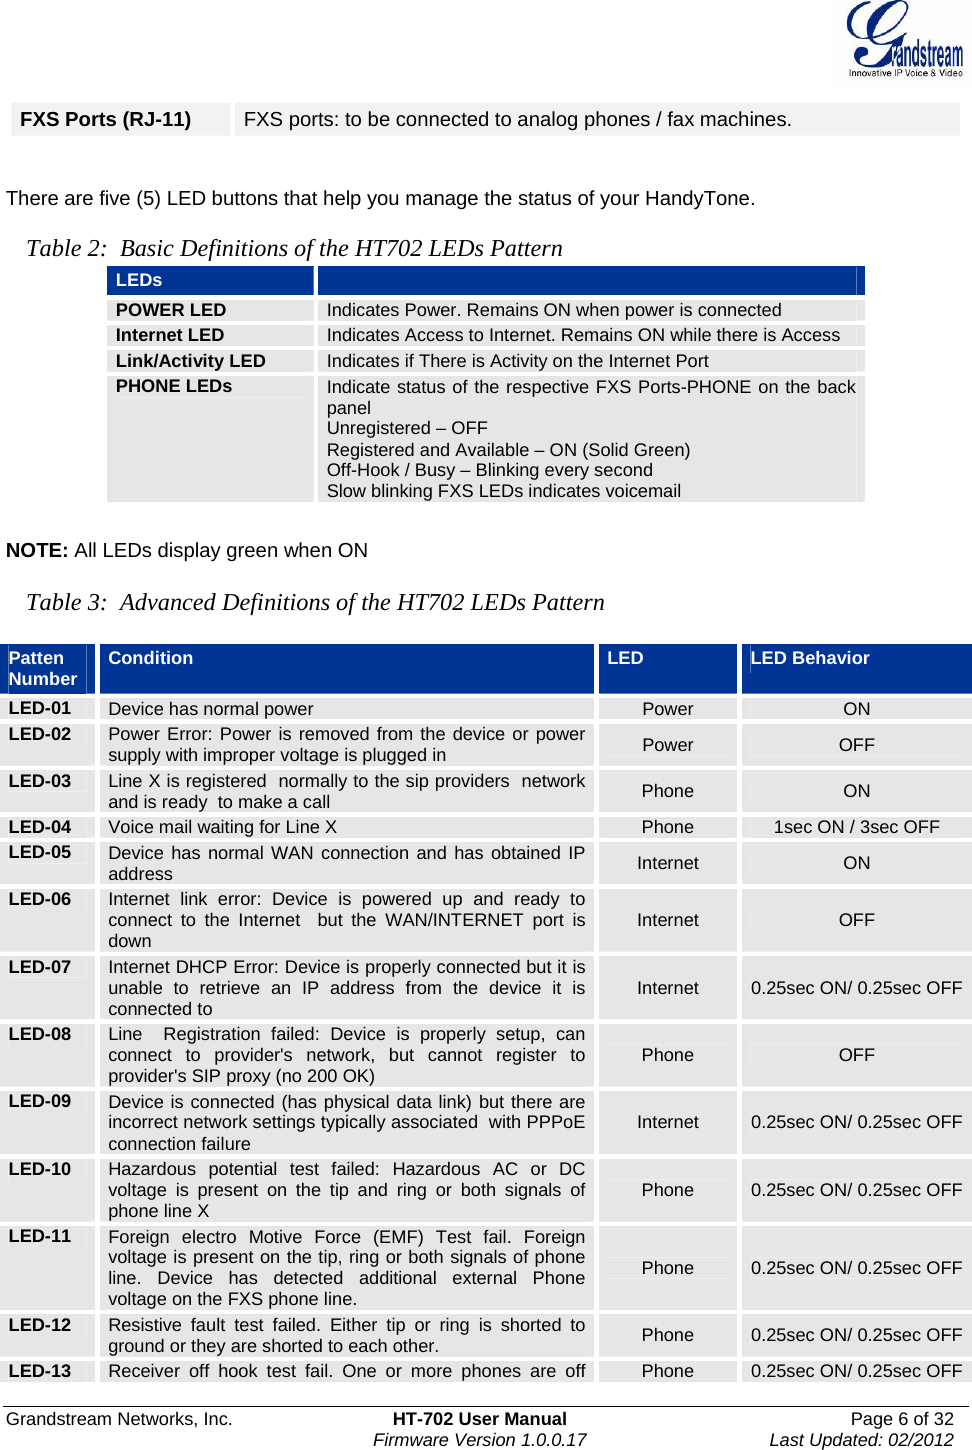  Grandstream Networks, Inc.  HT-702 User Manual  Page 6 of 32    Firmware Version 1.0.0.17  Last Updated: 02/2012  FXS Ports (RJ-11)  FXS ports: to be connected to analog phones / fax machines.   There are five (5) LED buttons that help you manage the status of your HandyTone.  Table 2:  Basic Definitions of the HT702 LEDs Pattern LEDs   POWER LED  Indicates Power. Remains ON when power is connected Internet LED  Indicates Access to Internet. Remains ON while there is Access  Link/Activity LED   Indicates if There is Activity on the Internet Port PHONE LEDs  Indicate status of the respective FXS Ports-PHONE on the back panel Unregistered – OFF Registered and Available – ON (Solid Green) Off-Hook / Busy – Blinking every second Slow blinking FXS LEDs indicates voicemail   NOTE: All LEDs display green when ON  Table 3:  Advanced Definitions of the HT702 LEDs Pattern  Patten Number Condition  LED  LED Behavior LED-01  Device has normal power  Power  ON LED-02  Power Error: Power is removed from the device or power supply with improper voltage is plugged in  Power  OFF LED-03  Line X is registered  normally to the sip providers  network  and is ready  to make a call  Phone  ON LED-04  Voice mail waiting for Line X  Phone  1sec ON / 3sec OFF LED-05  Device has normal WAN connection and has obtained IP address  Internet  ON LED-06  Internet link error: Device is powered up and ready to connect to the Internet  but the WAN/INTERNET port is down  Internet  OFF LED-07  Internet DHCP Error: Device is properly connected but it is unable to retrieve an IP address from the device it is connected to  Internet  0.25sec ON/ 0.25sec OFFLED-08  Line  Registration failed: Device is properly setup, can connect to provider&apos;s network, but cannot register to provider&apos;s SIP proxy (no 200 OK)  Phone  OFF LED-09  Device is connected (has physical data link) but there are incorrect network settings typically associated  with PPPoE connection failure  Internet  0.25sec ON/ 0.25sec OFFLED-10  Hazardous potential test failed: Hazardous AC or DC voltage is present on the tip and ring or both signals of phone line X  Phone  0.25sec ON/ 0.25sec OFFLED-11  Foreign electro Motive Force (EMF) Test fail. Foreign voltage is present on the tip, ring or both signals of phone line. Device has detected additional external Phone voltage on the FXS phone line. Phone  0.25sec ON/ 0.25sec OFFLED-12  Resistive fault test failed. Either tip or ring is shorted to ground or they are shorted to each other.  Phone  0.25sec ON/ 0.25sec OFFLED-13  Receiver off hook test fail. One or more phones are off  Phone  0.25sec ON/ 0.25sec OFF